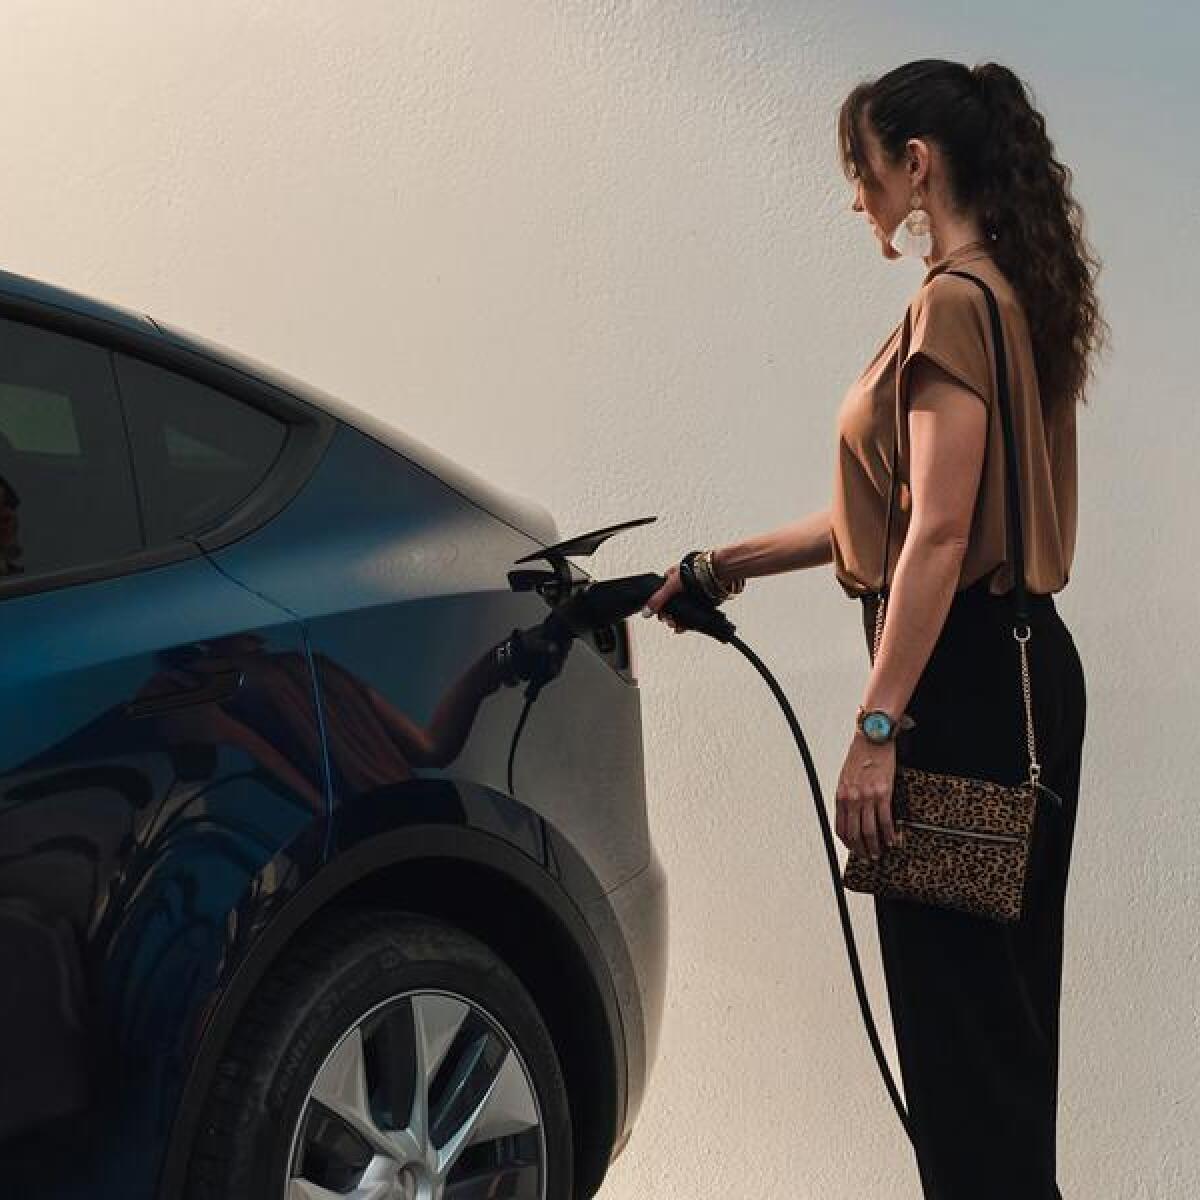 A woman charging an electric vehicle